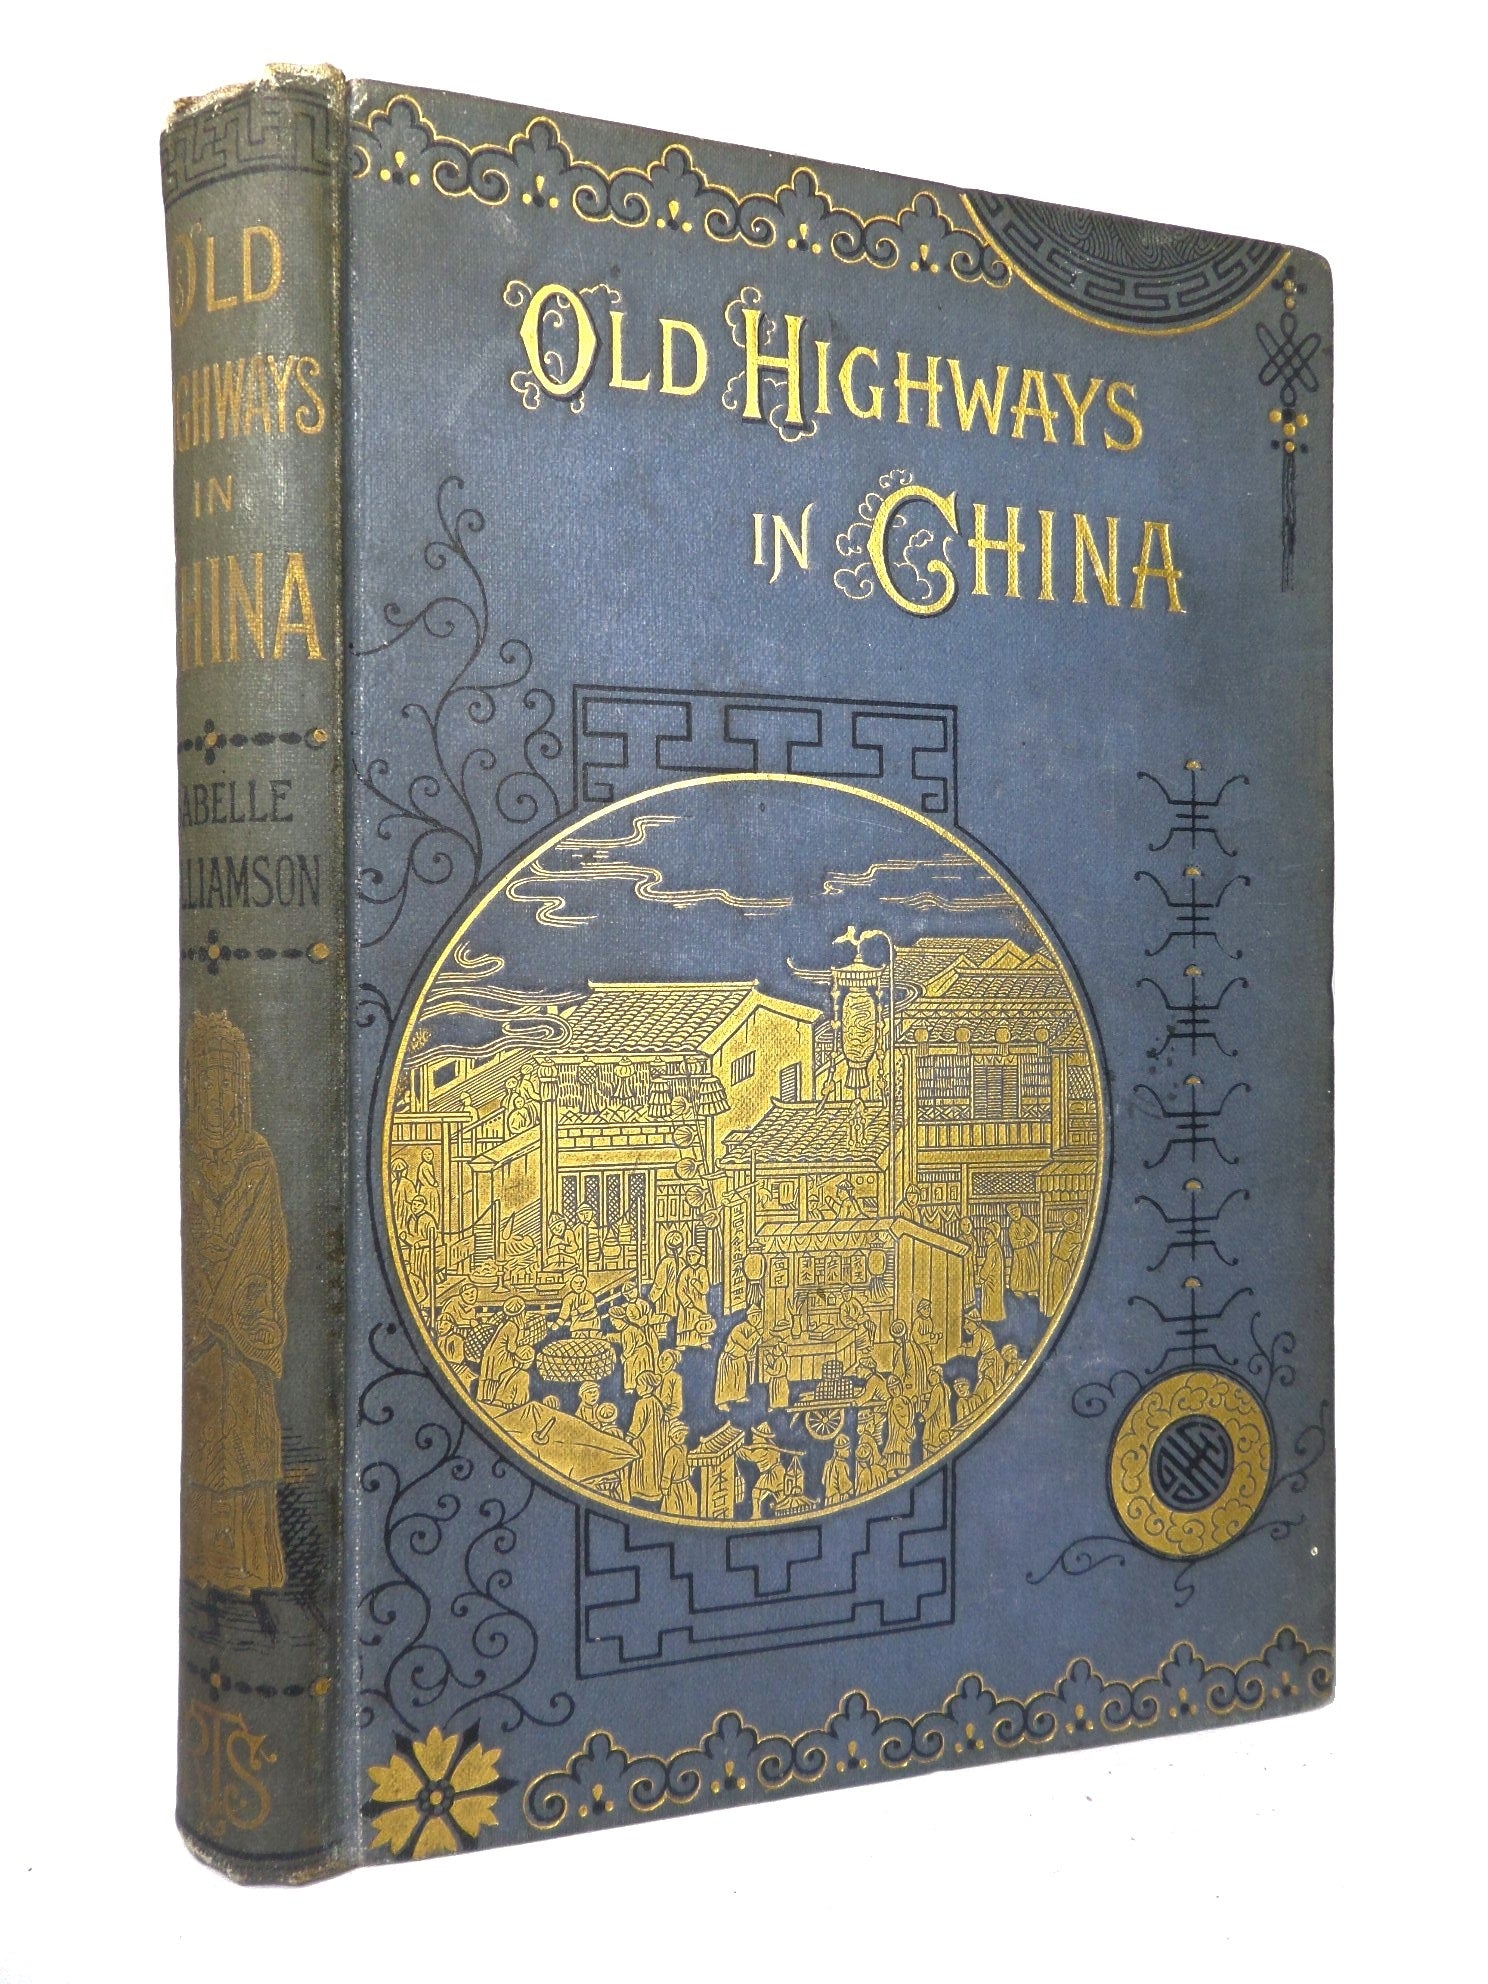 OLD HIGHWAYS IN CHINA BY ISABELLE WILLIAMSON 1884 FIRST EDITION